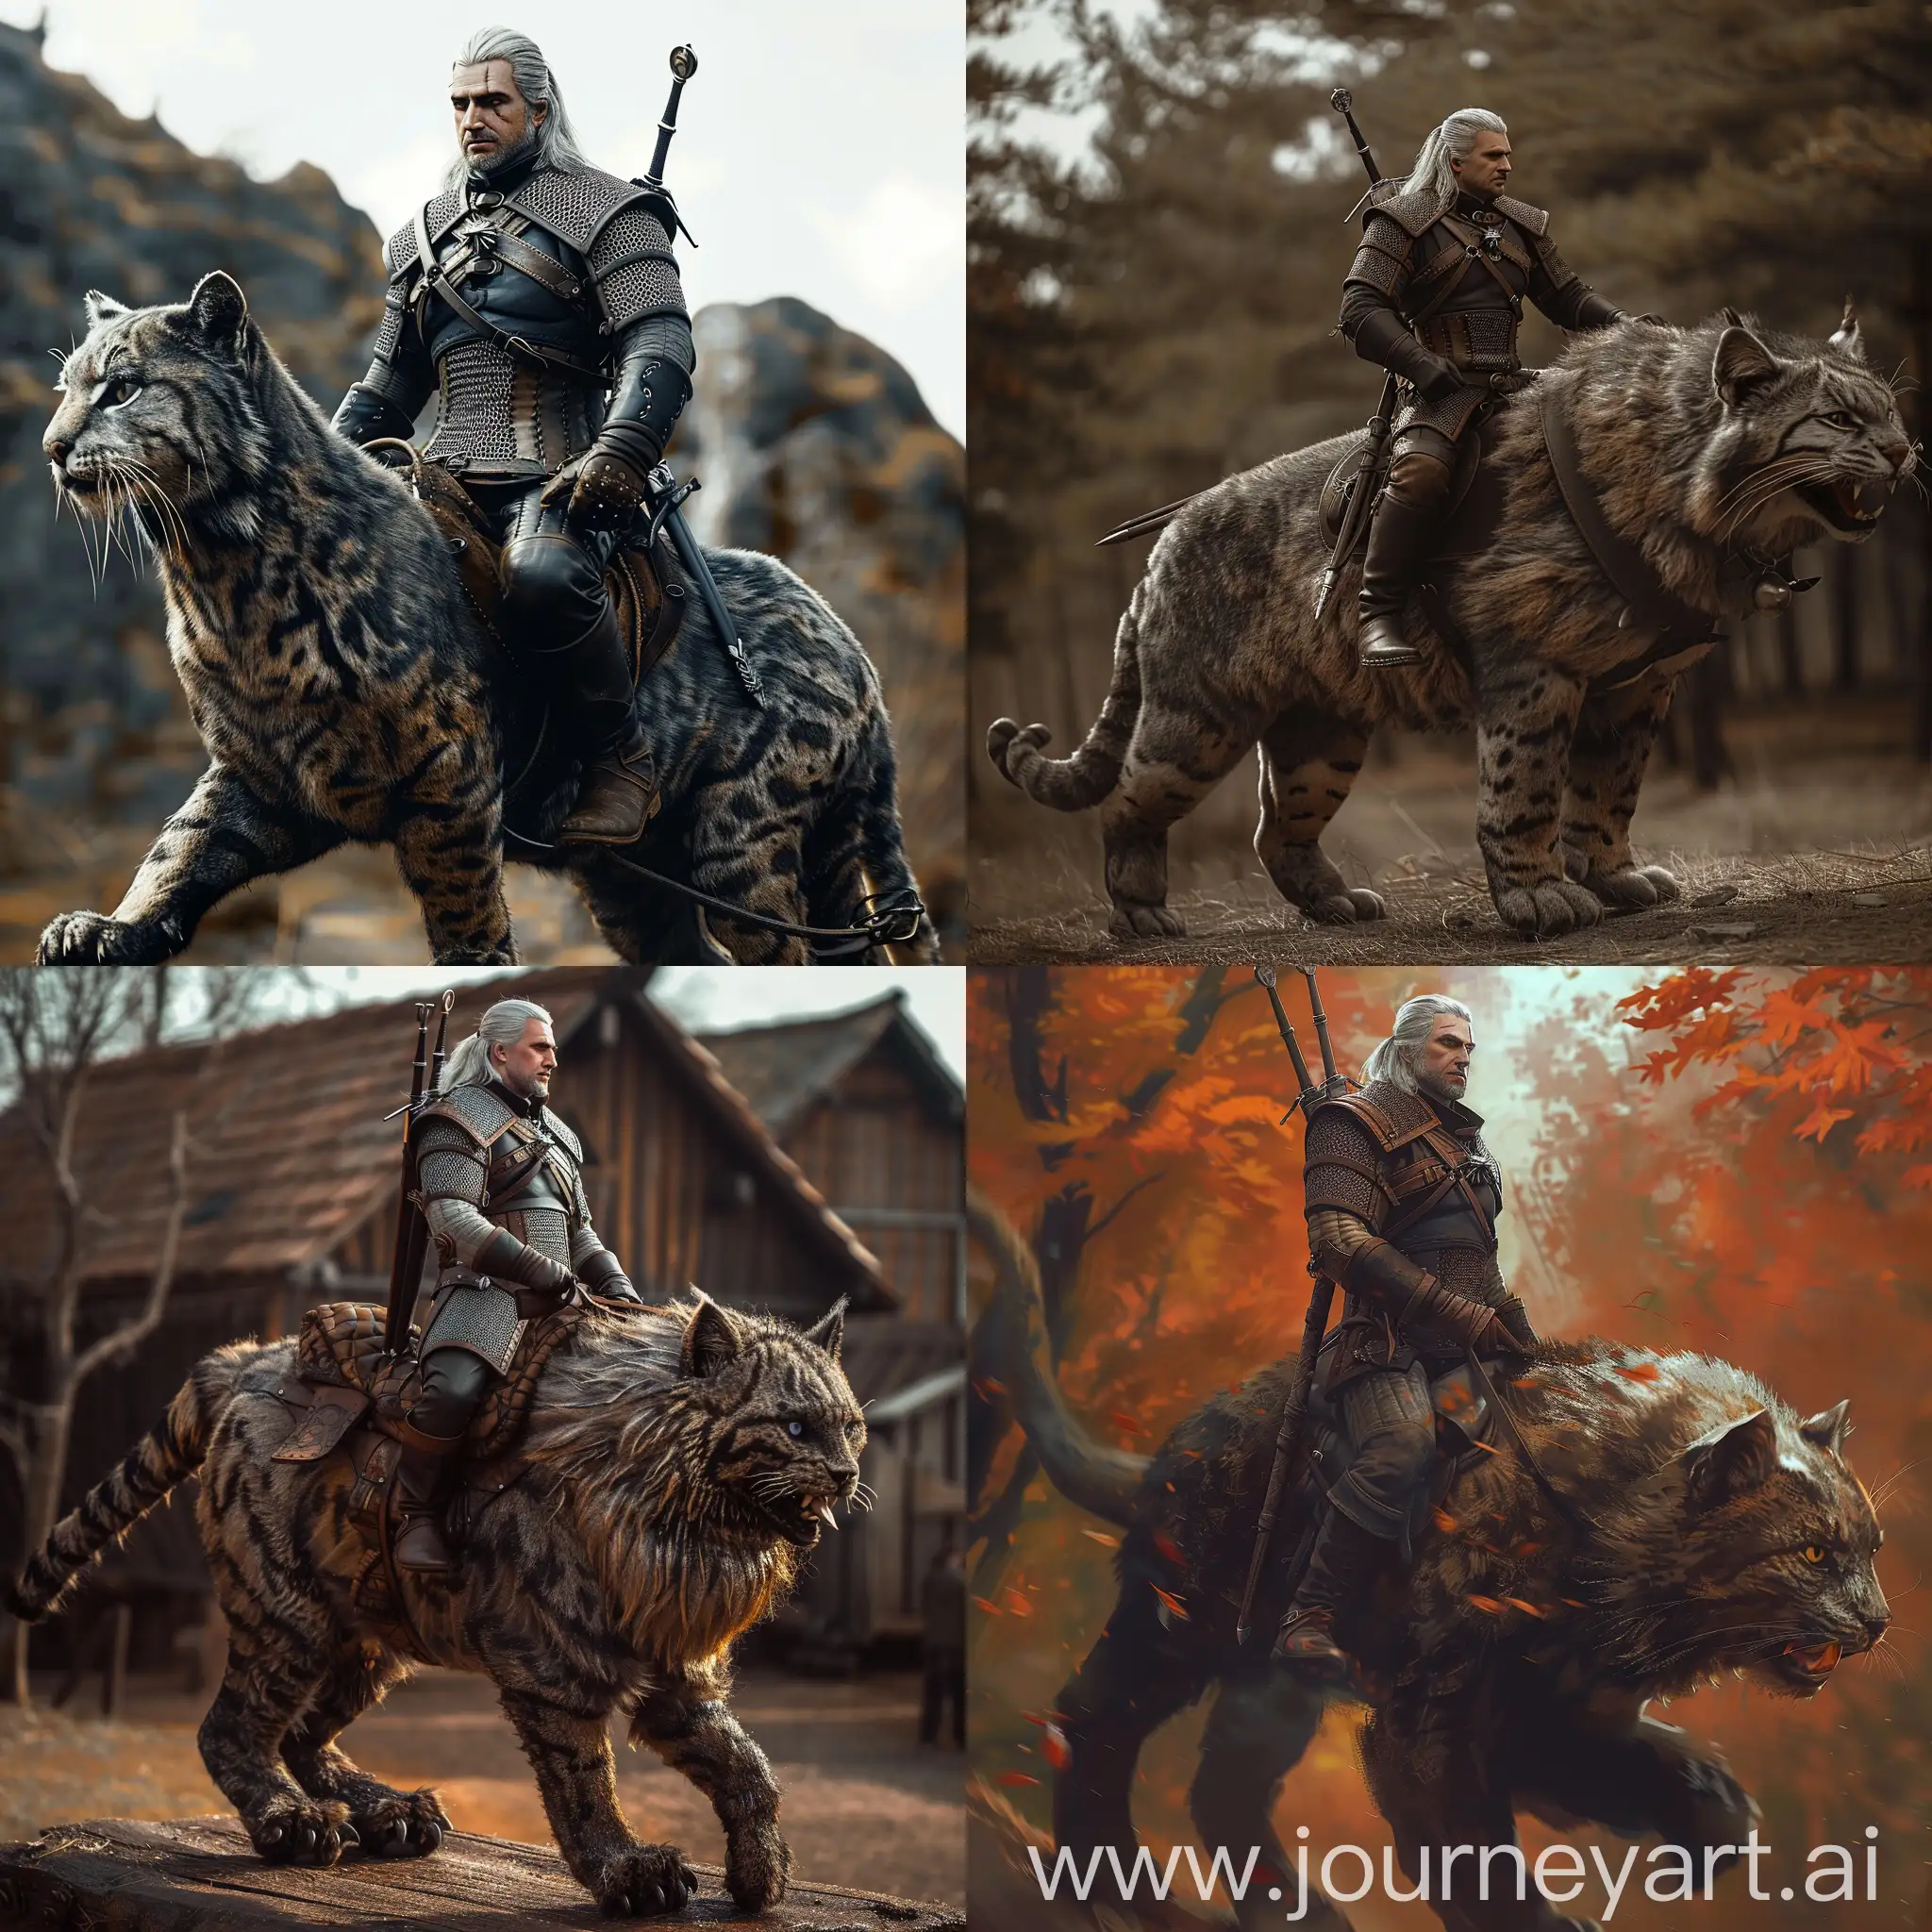 Geralt-of-Rivia-Riding-Majestic-Cat-in-the-Witcher-Universe